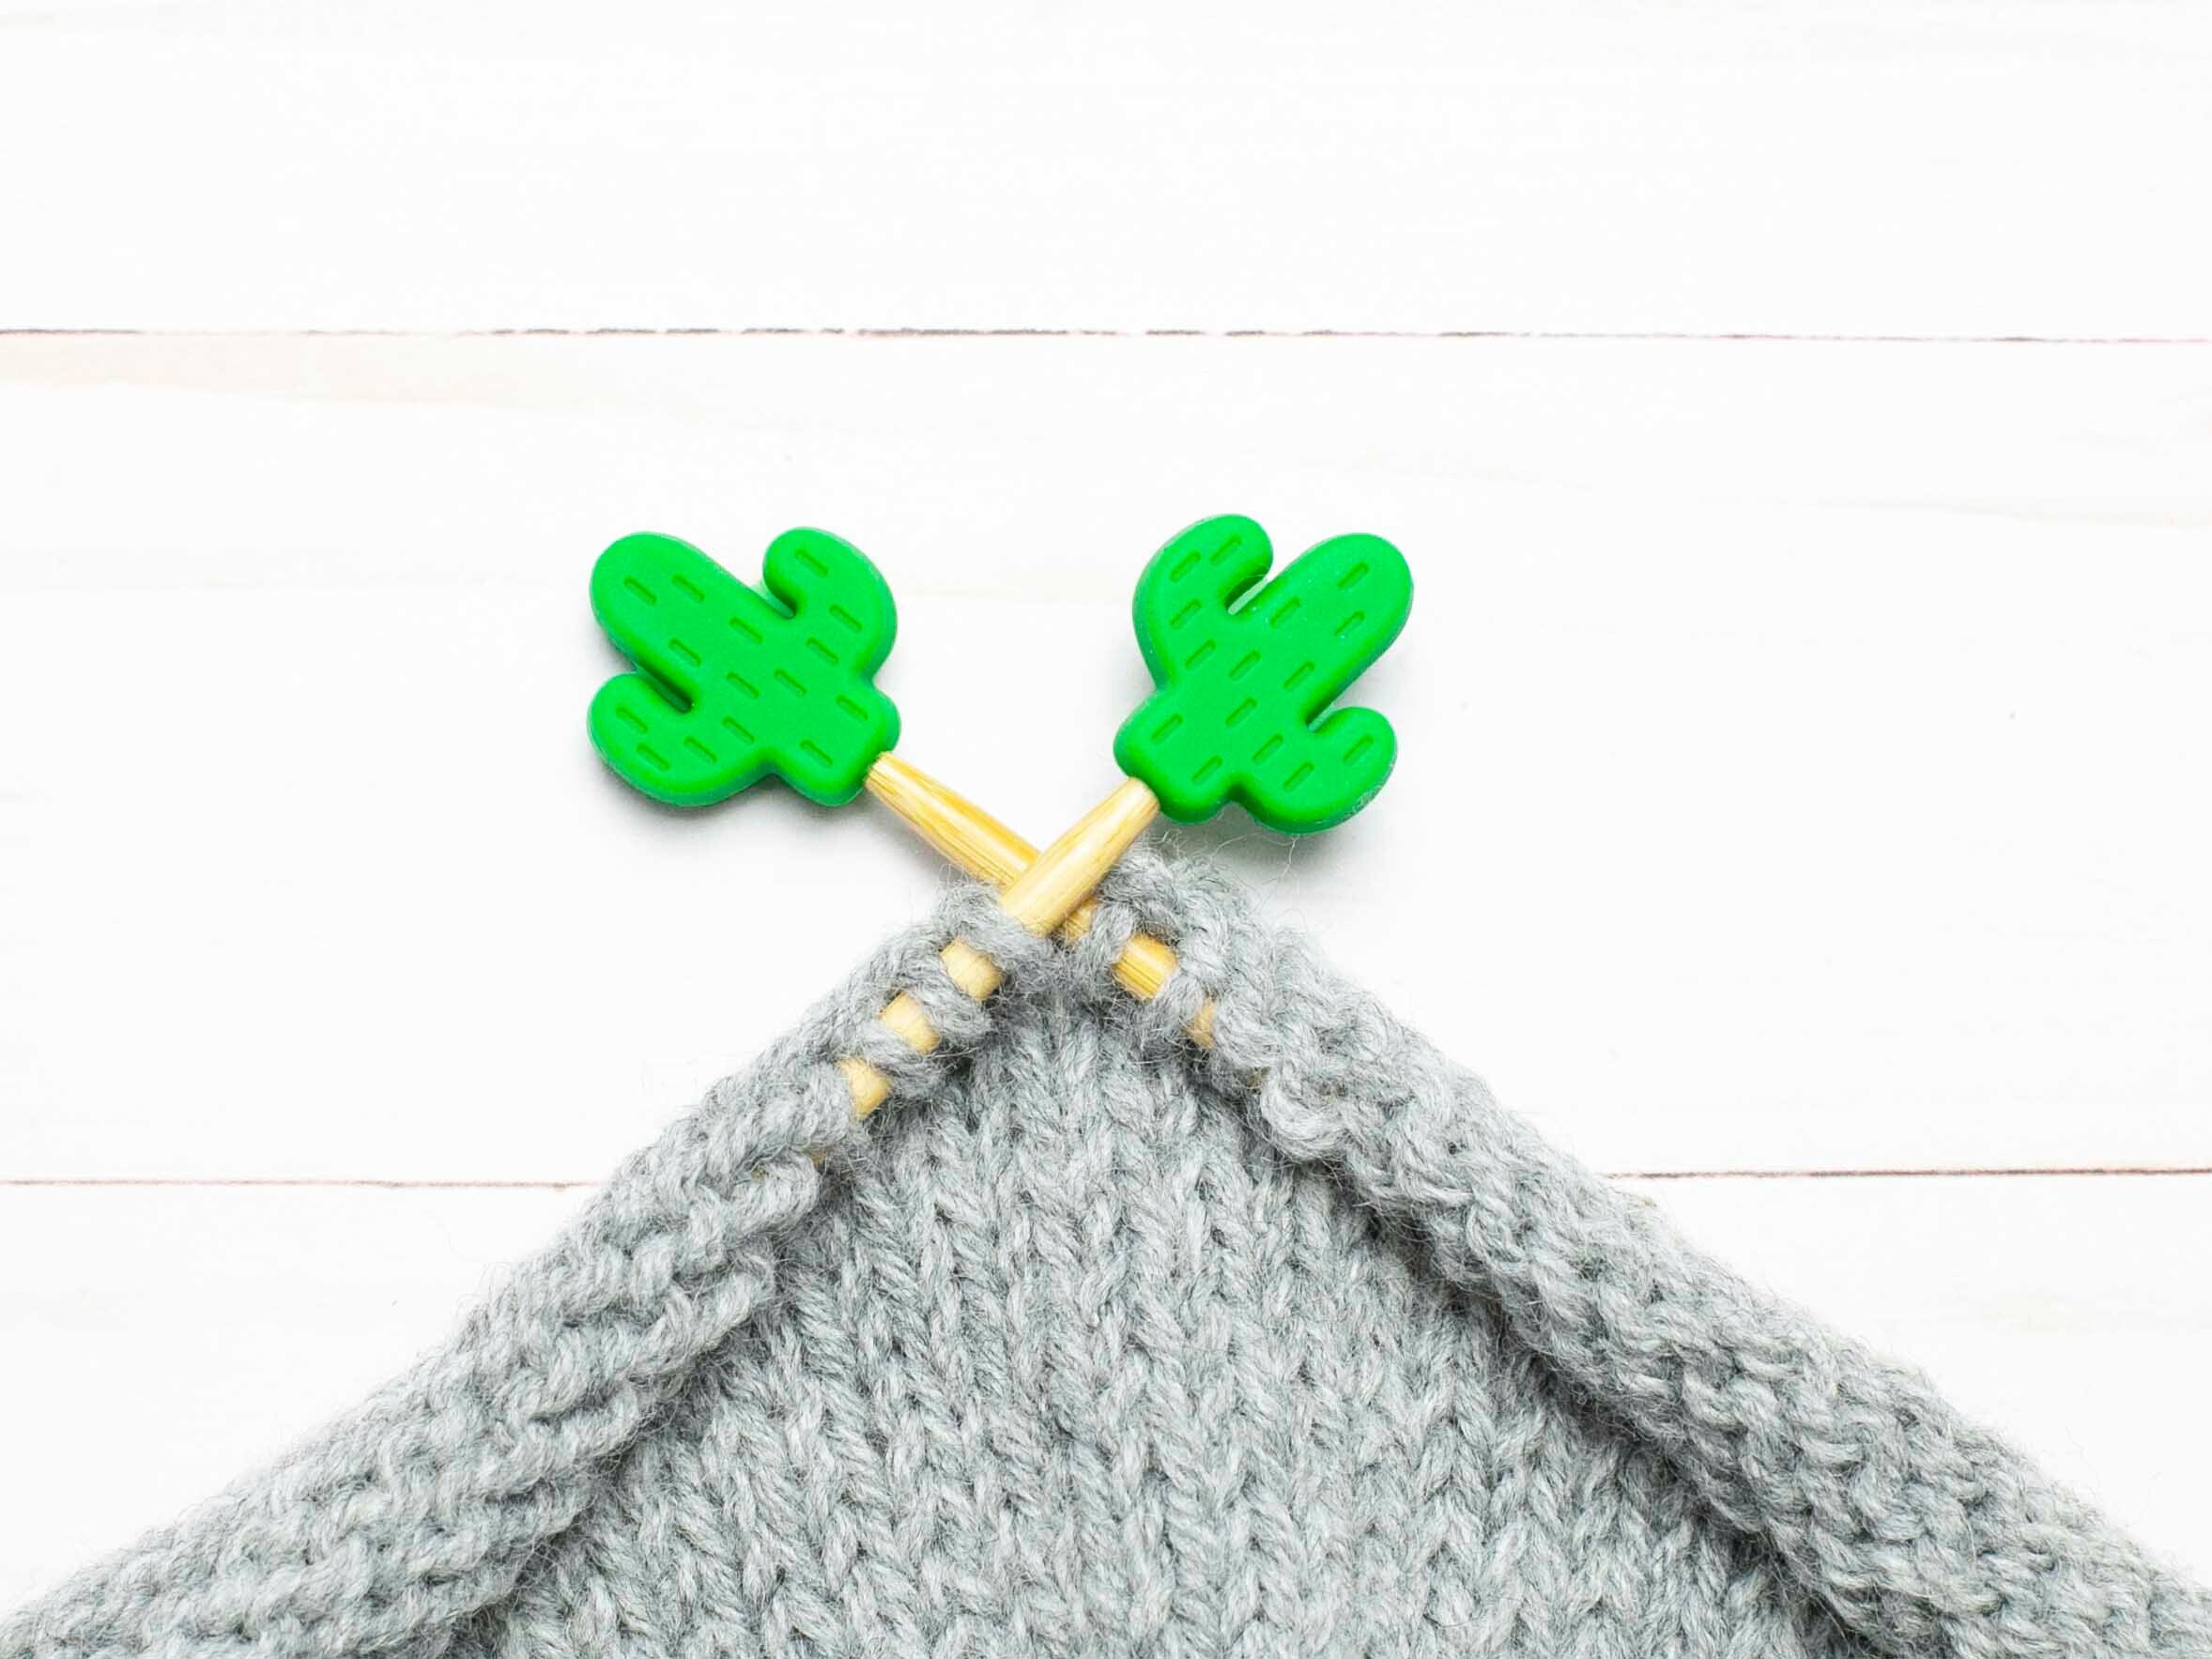 4 Pcs Green Cactus Knitting Needle Stoppers, Silicone Needle Point Protectors Small Knitting Tip Protectors Needle End Caps for Knitting Accessories